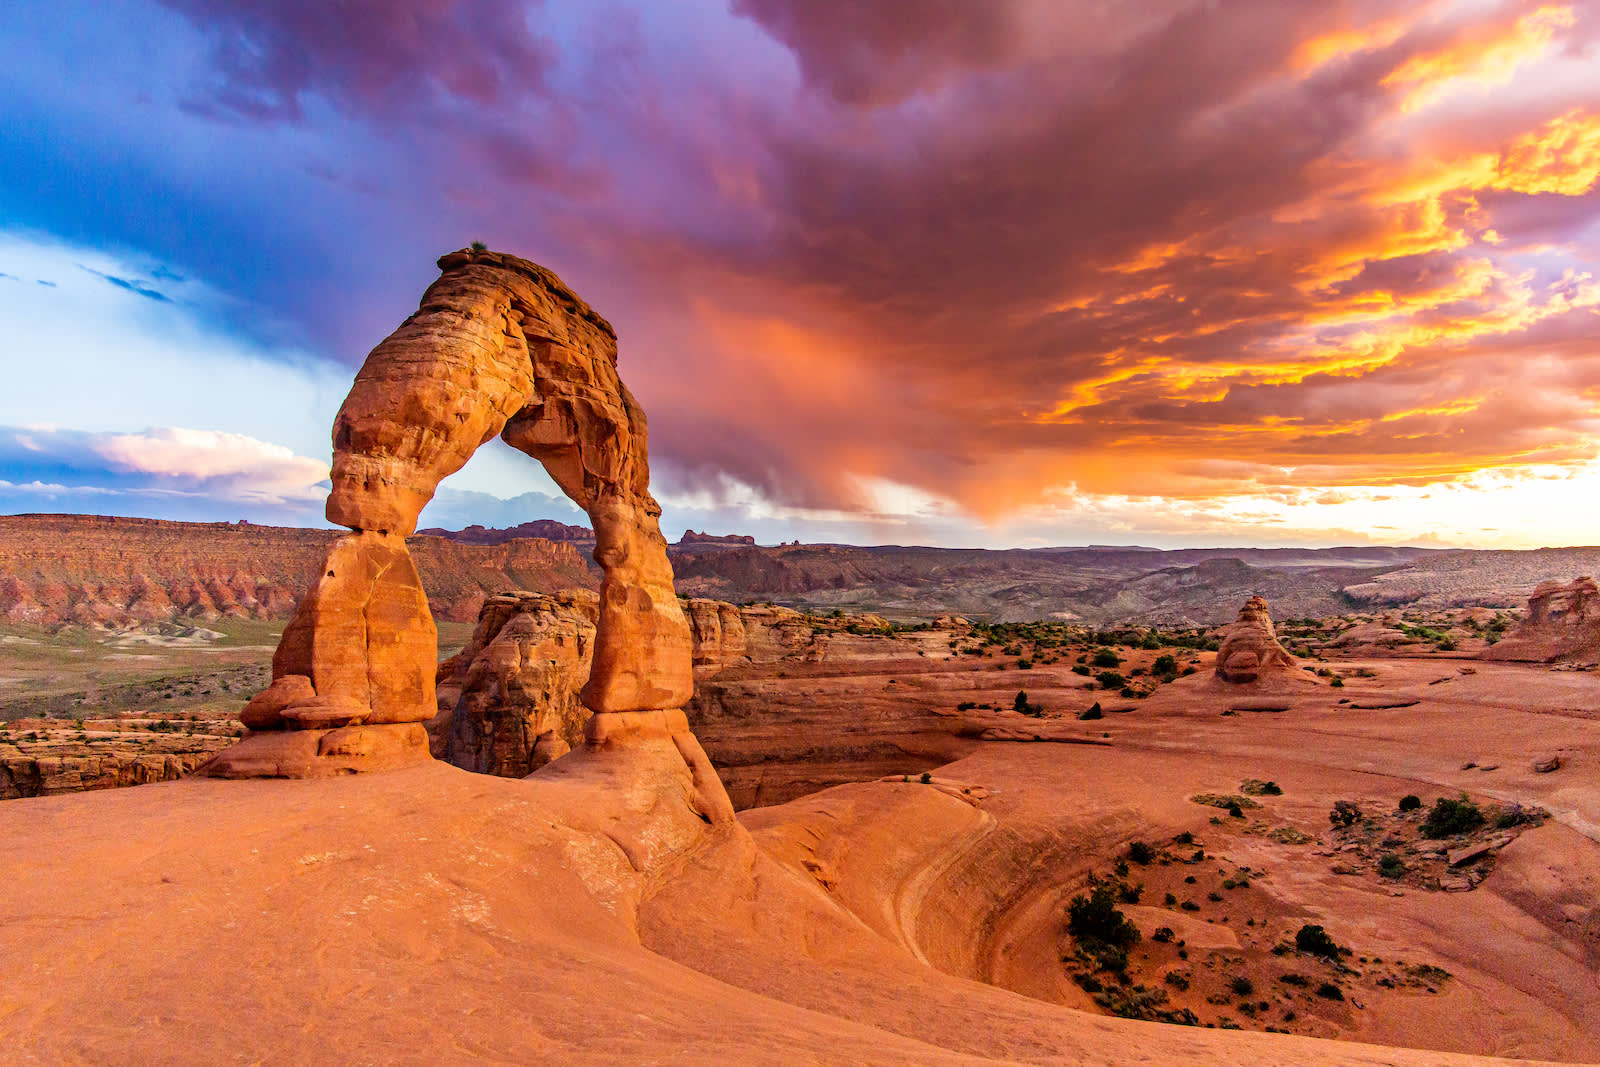 Sun Or Moon Quiz Delicate Arch at Arches National Park, Utah, United States